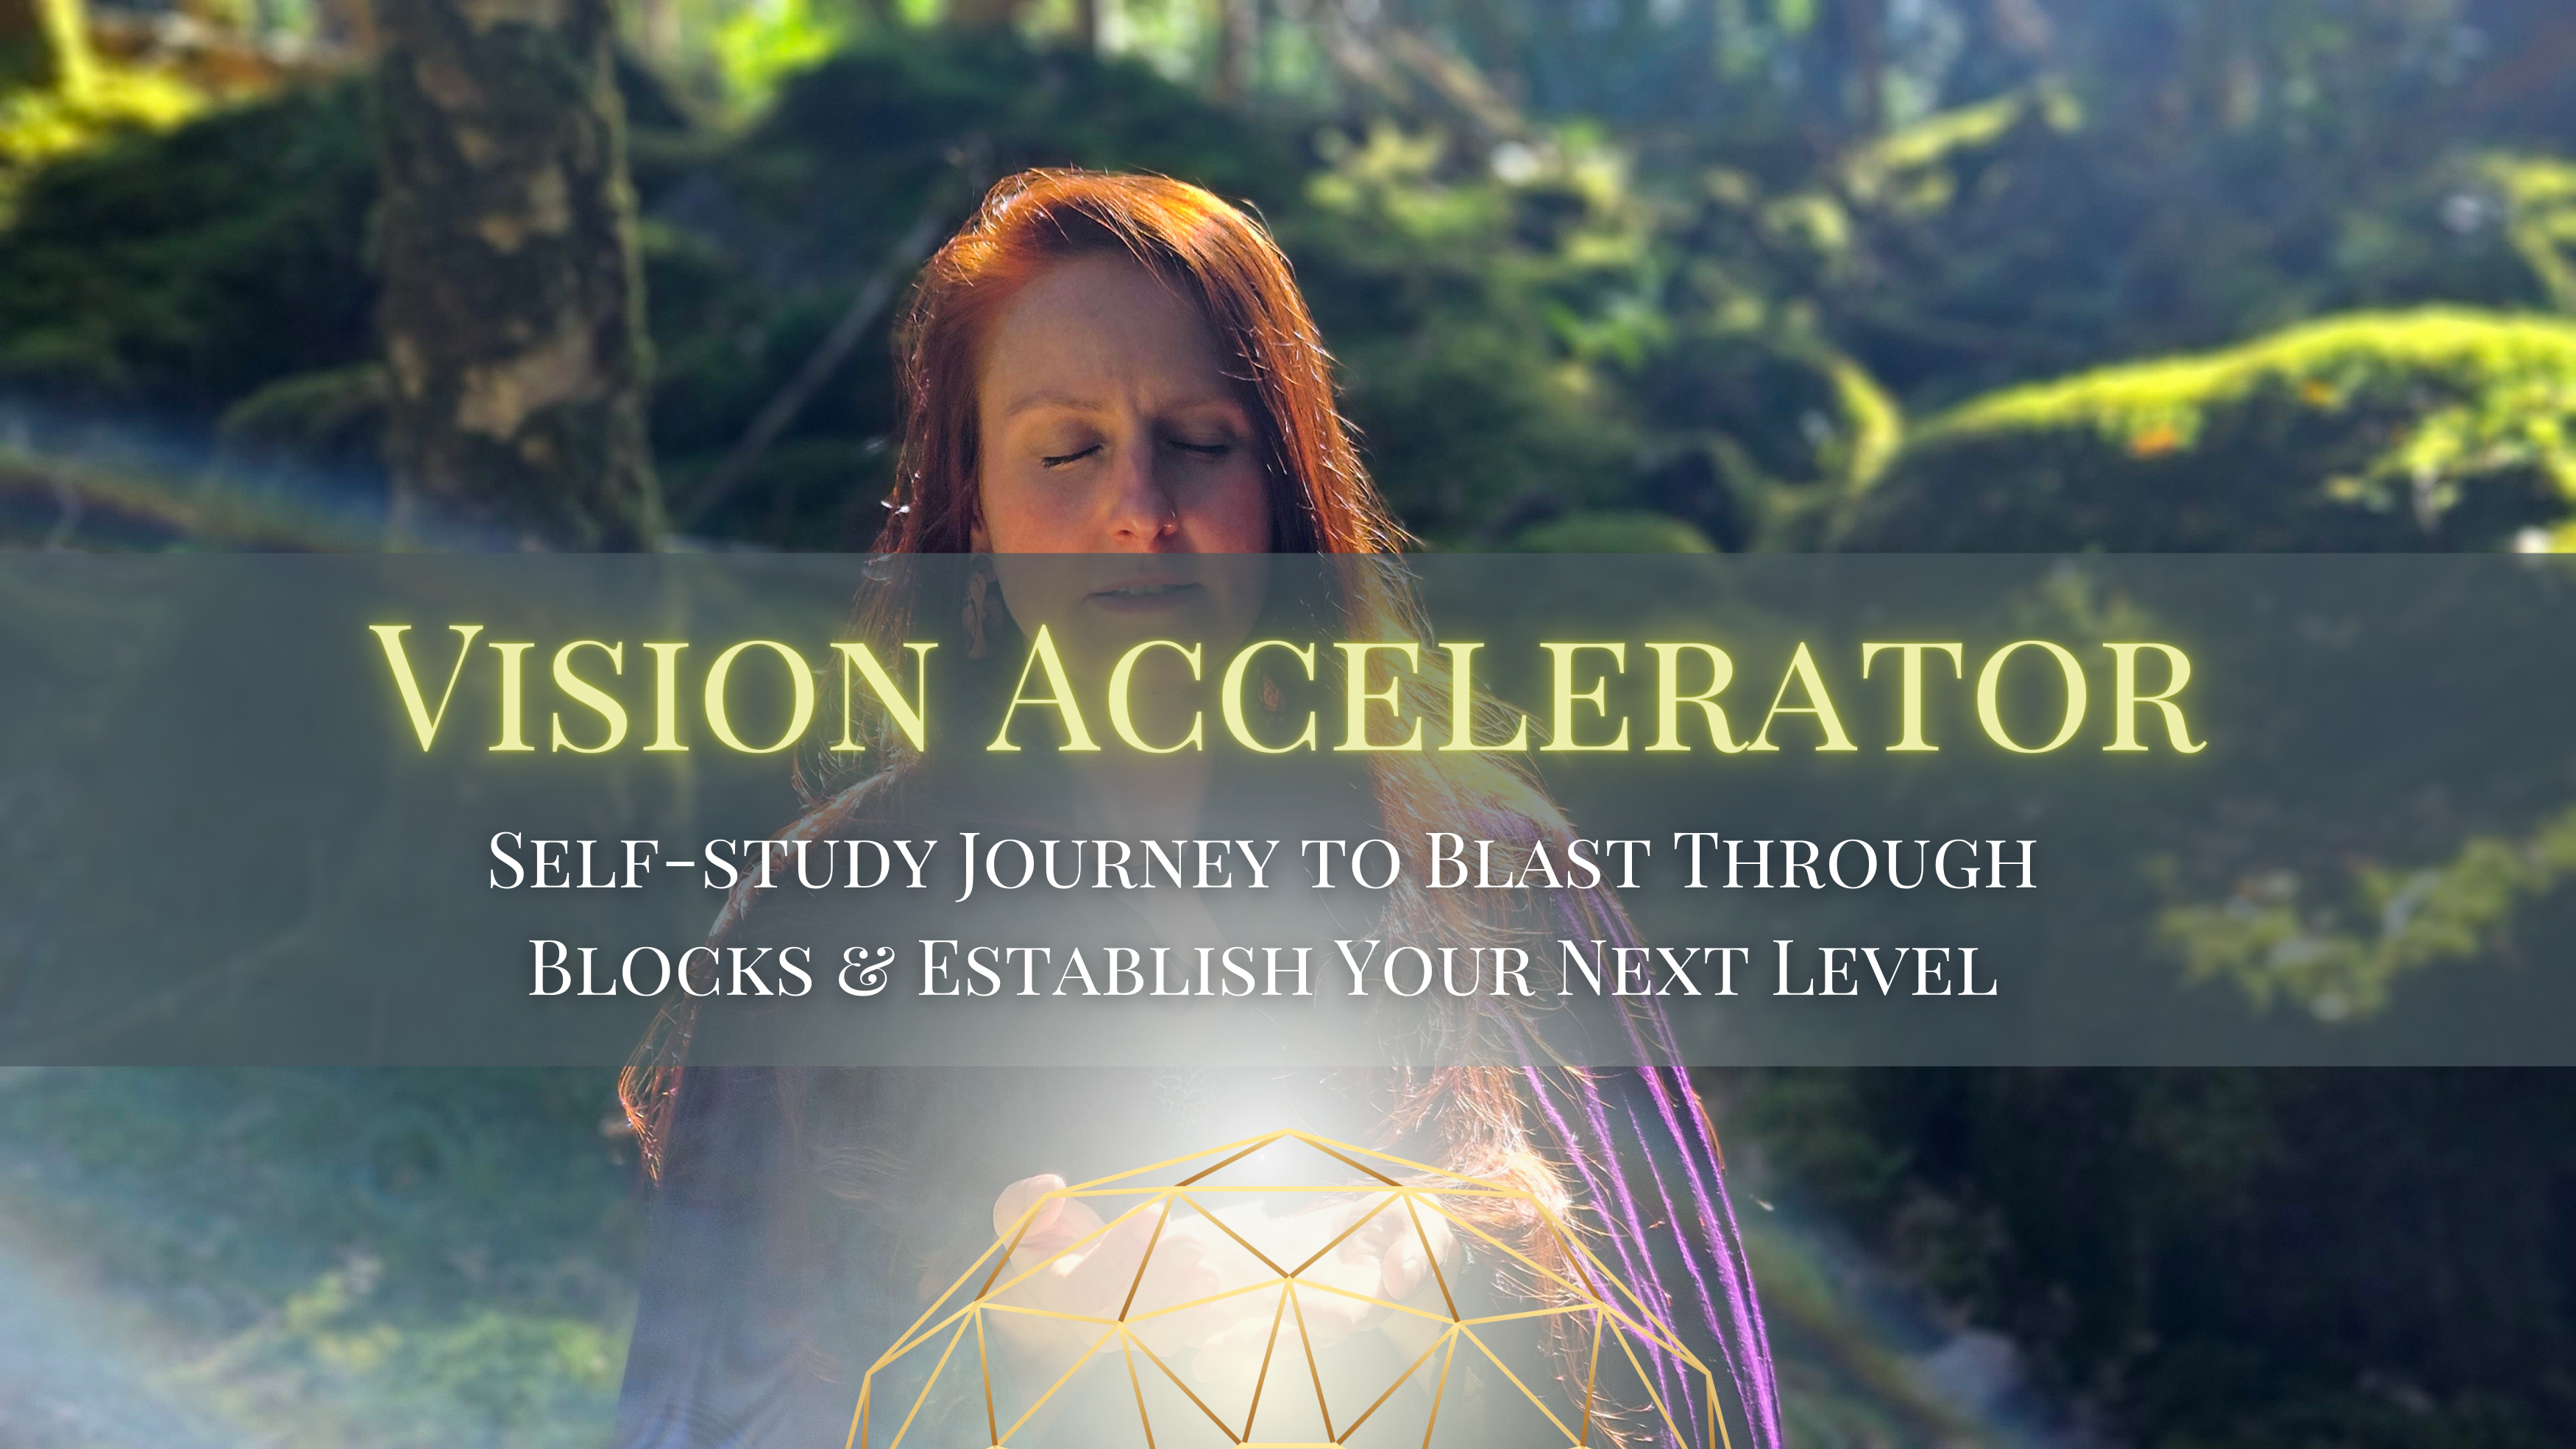 The Vision Accelerator